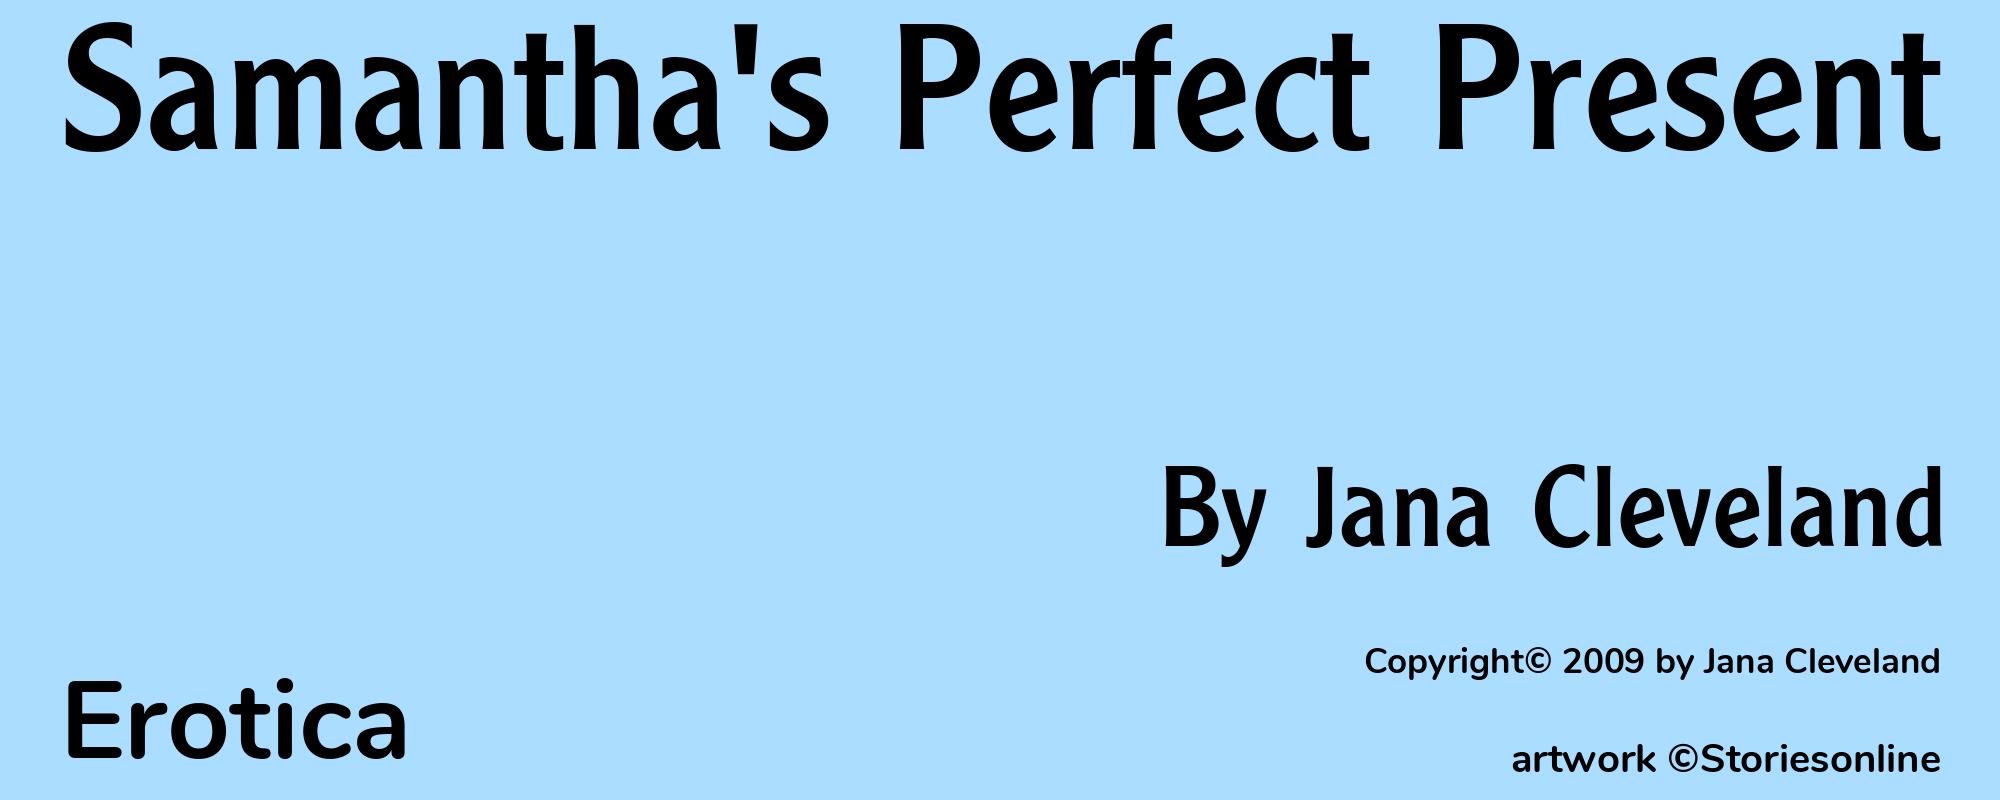 Samantha's Perfect Present - Cover